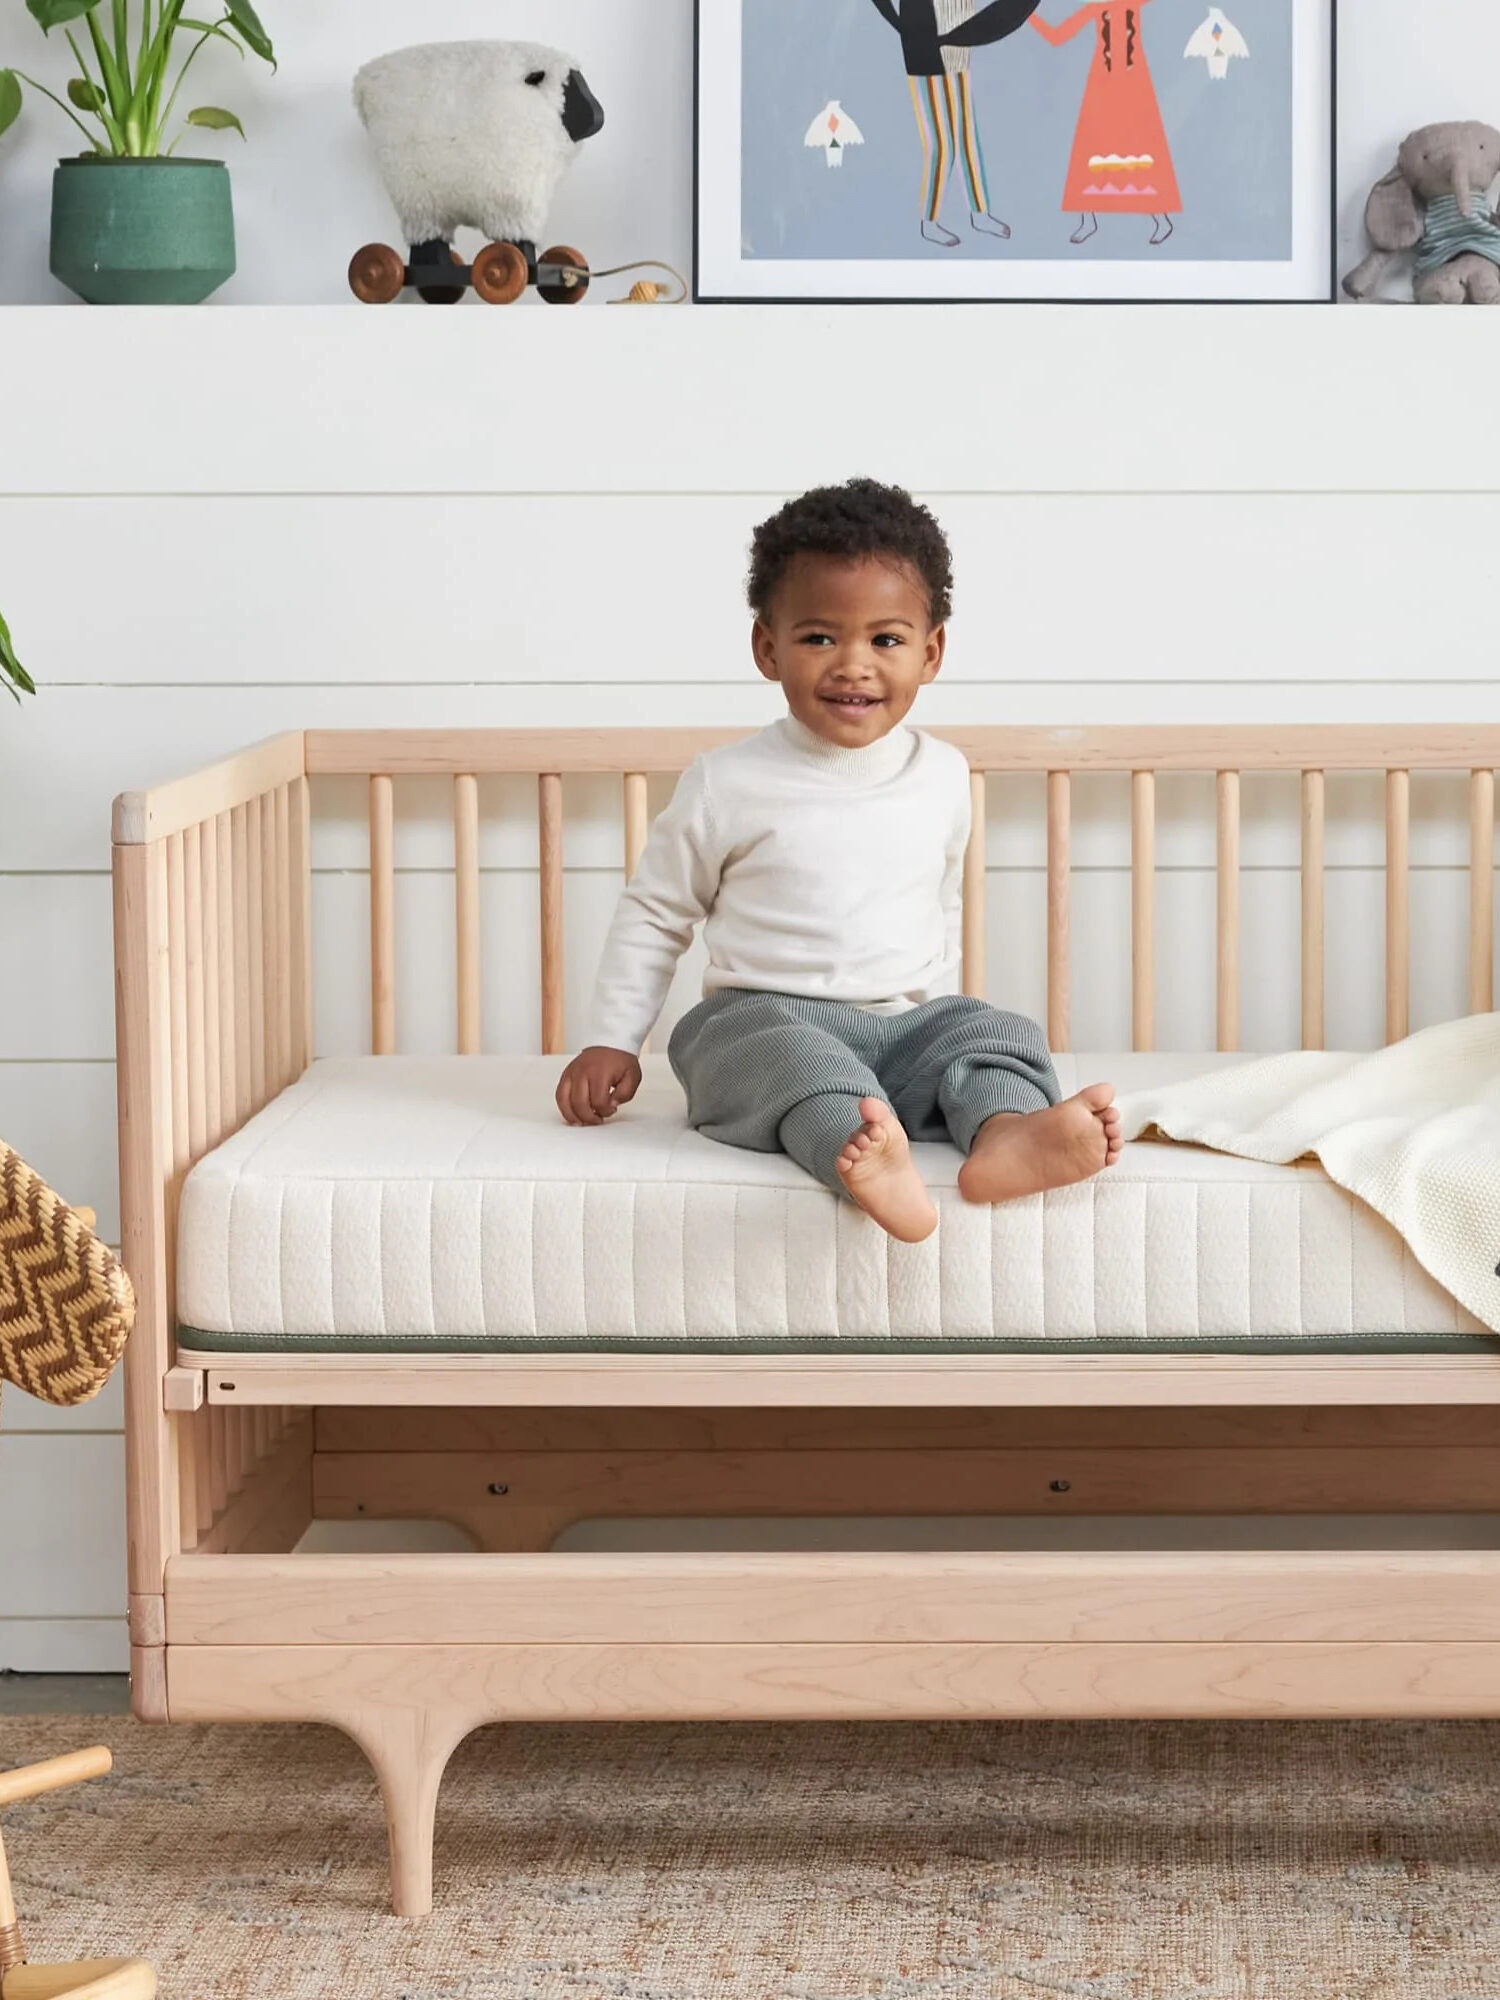 A young child sits on a mattress in a crib